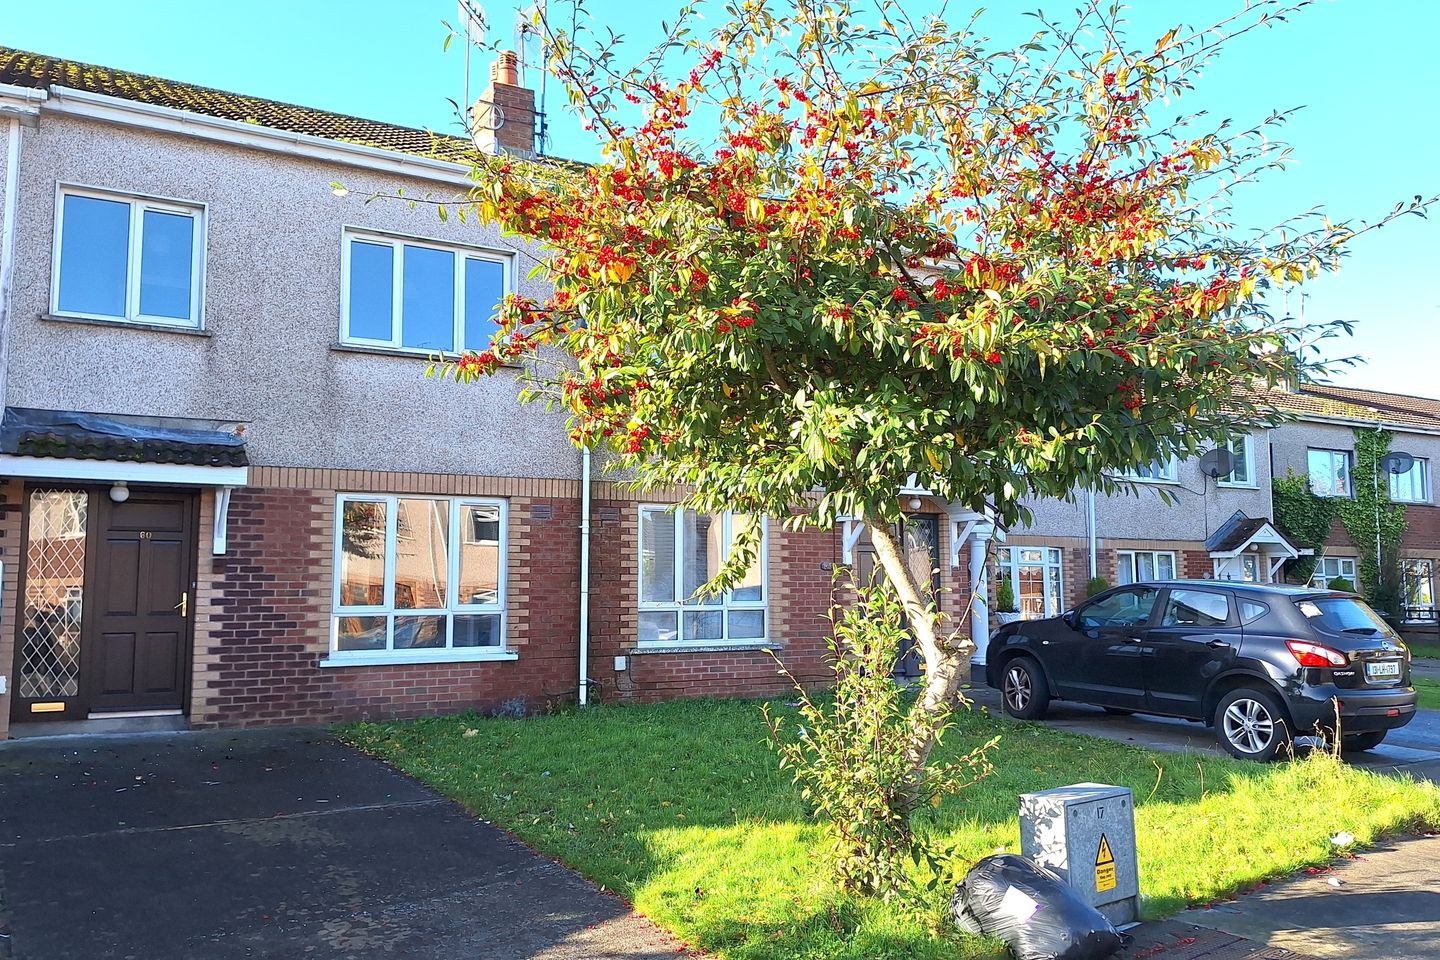 60 Cedarfield, Donore Road, Drogheda, Co. Louth, A92KH2V